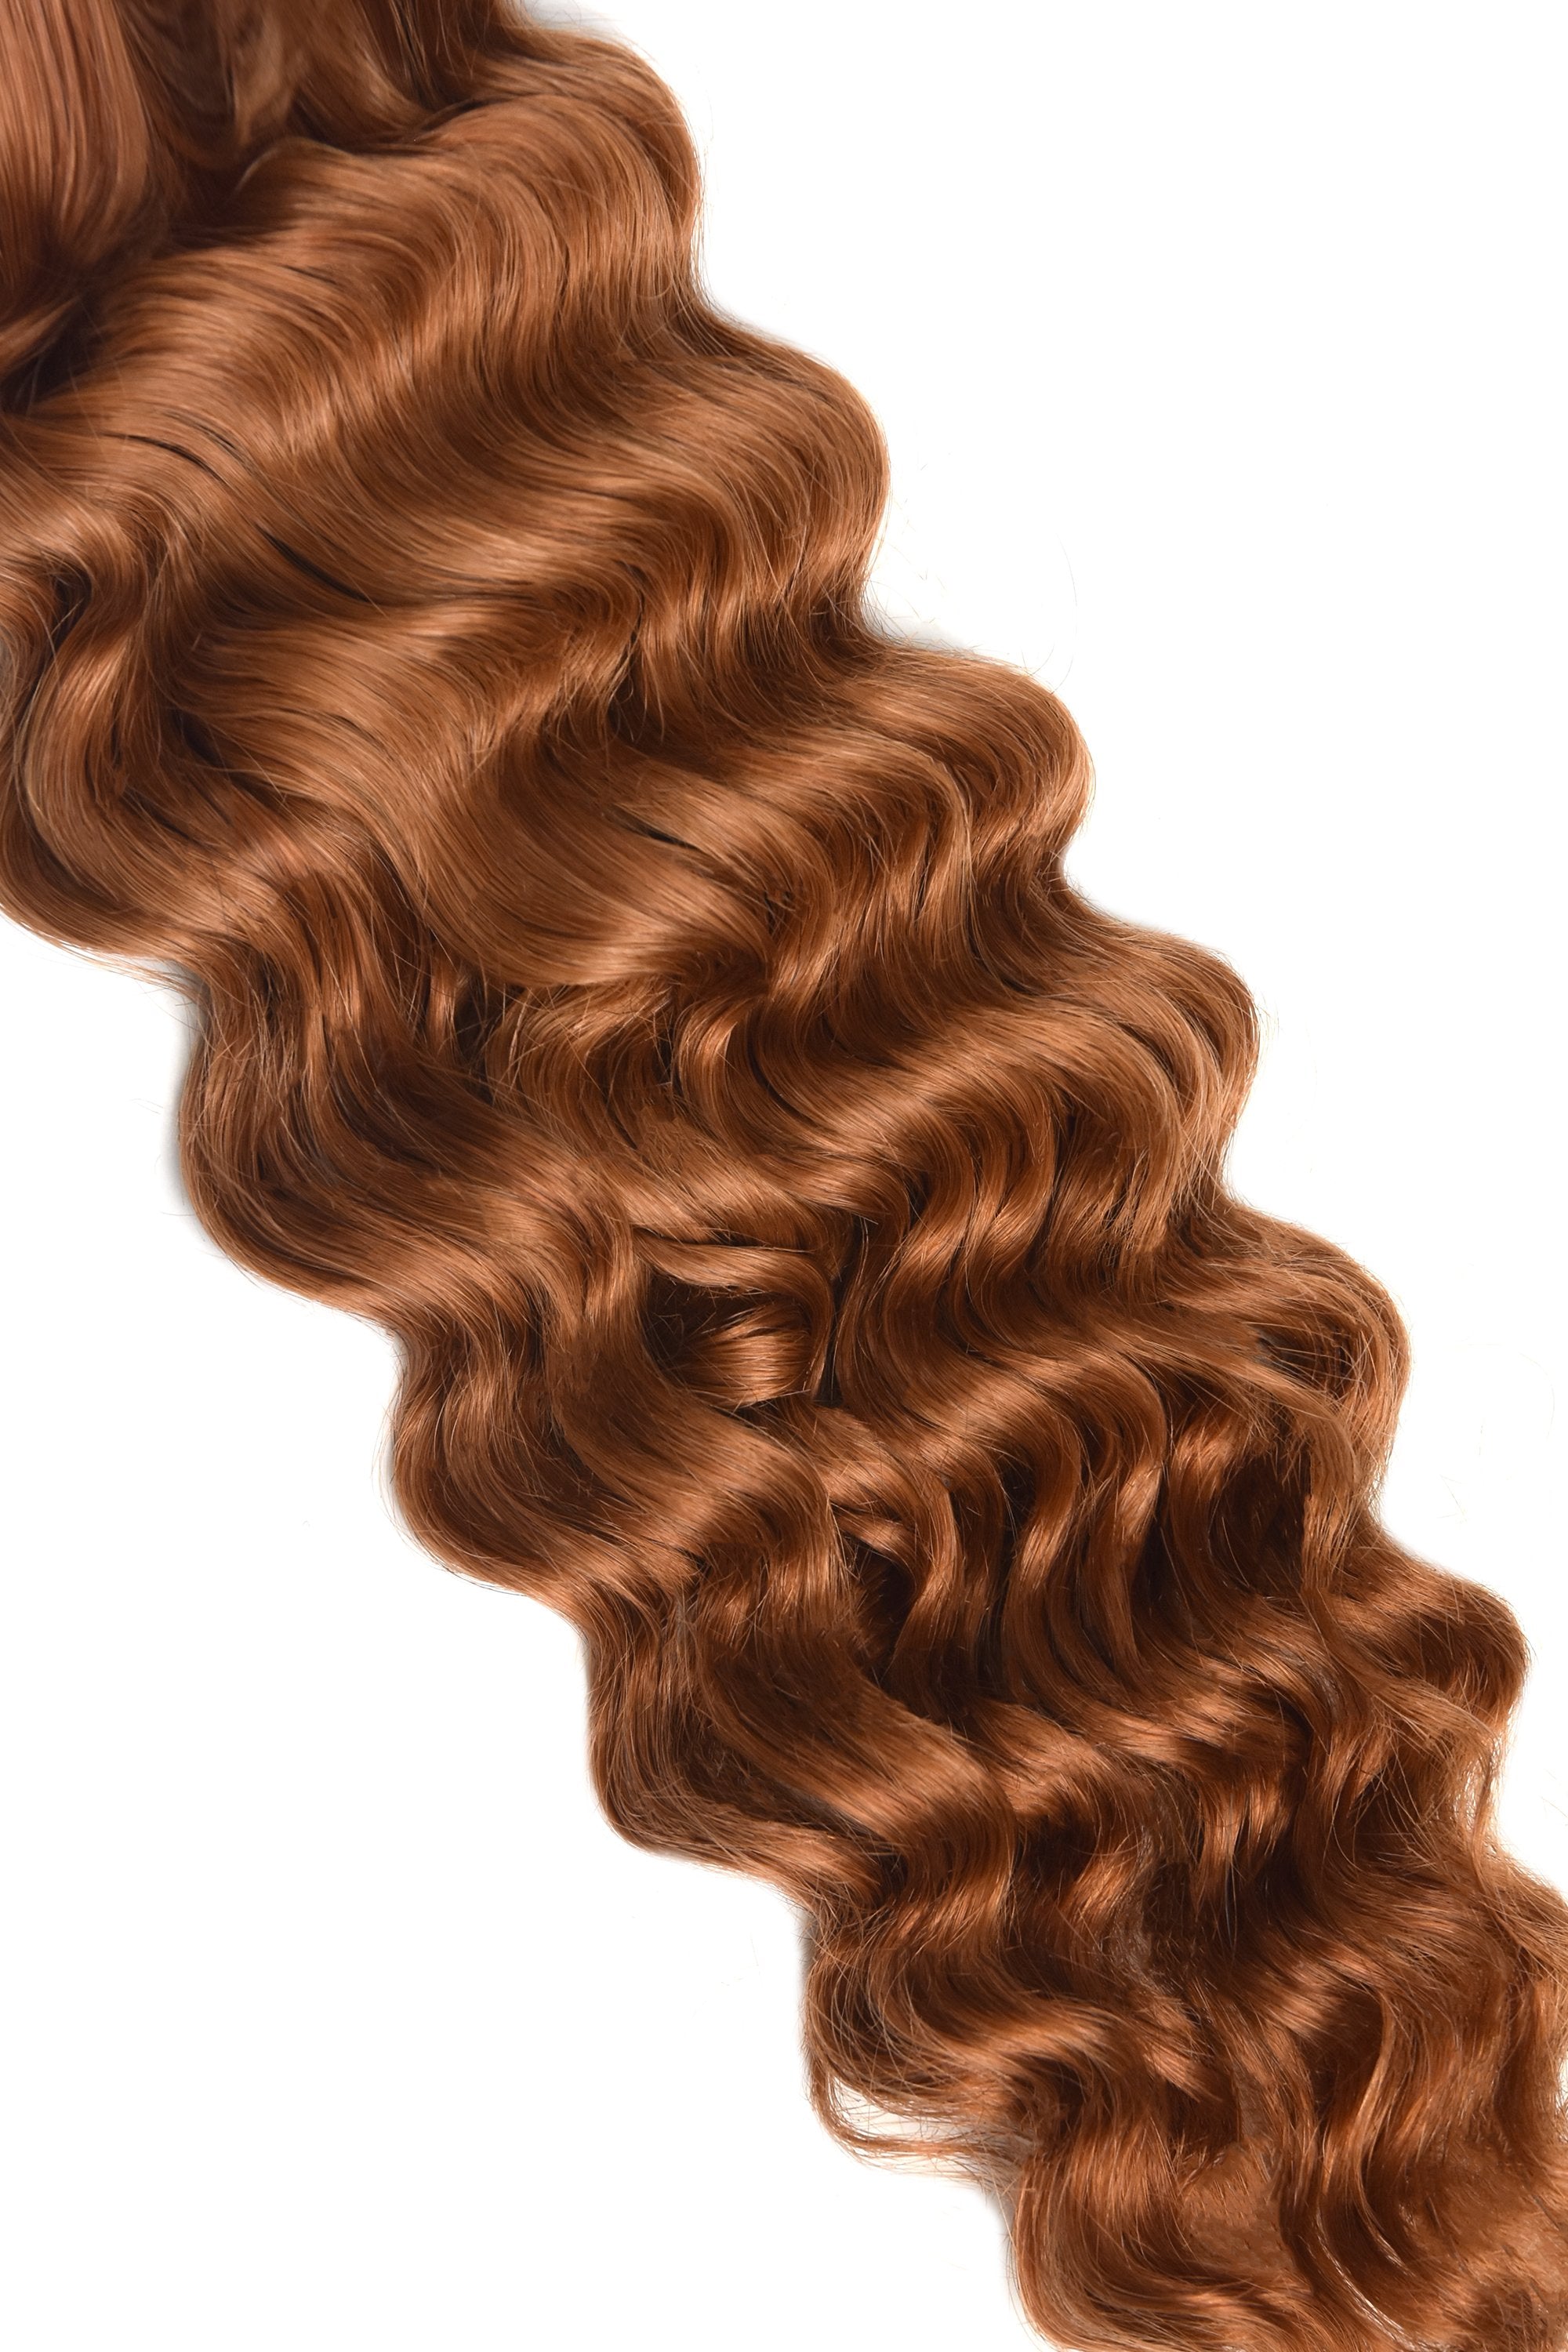 Curly Full Head Remy Clip in Human Hair Extensions - Ginger Red/Natural Red (#350) Curly Clip In Hair Extensions cliphair 